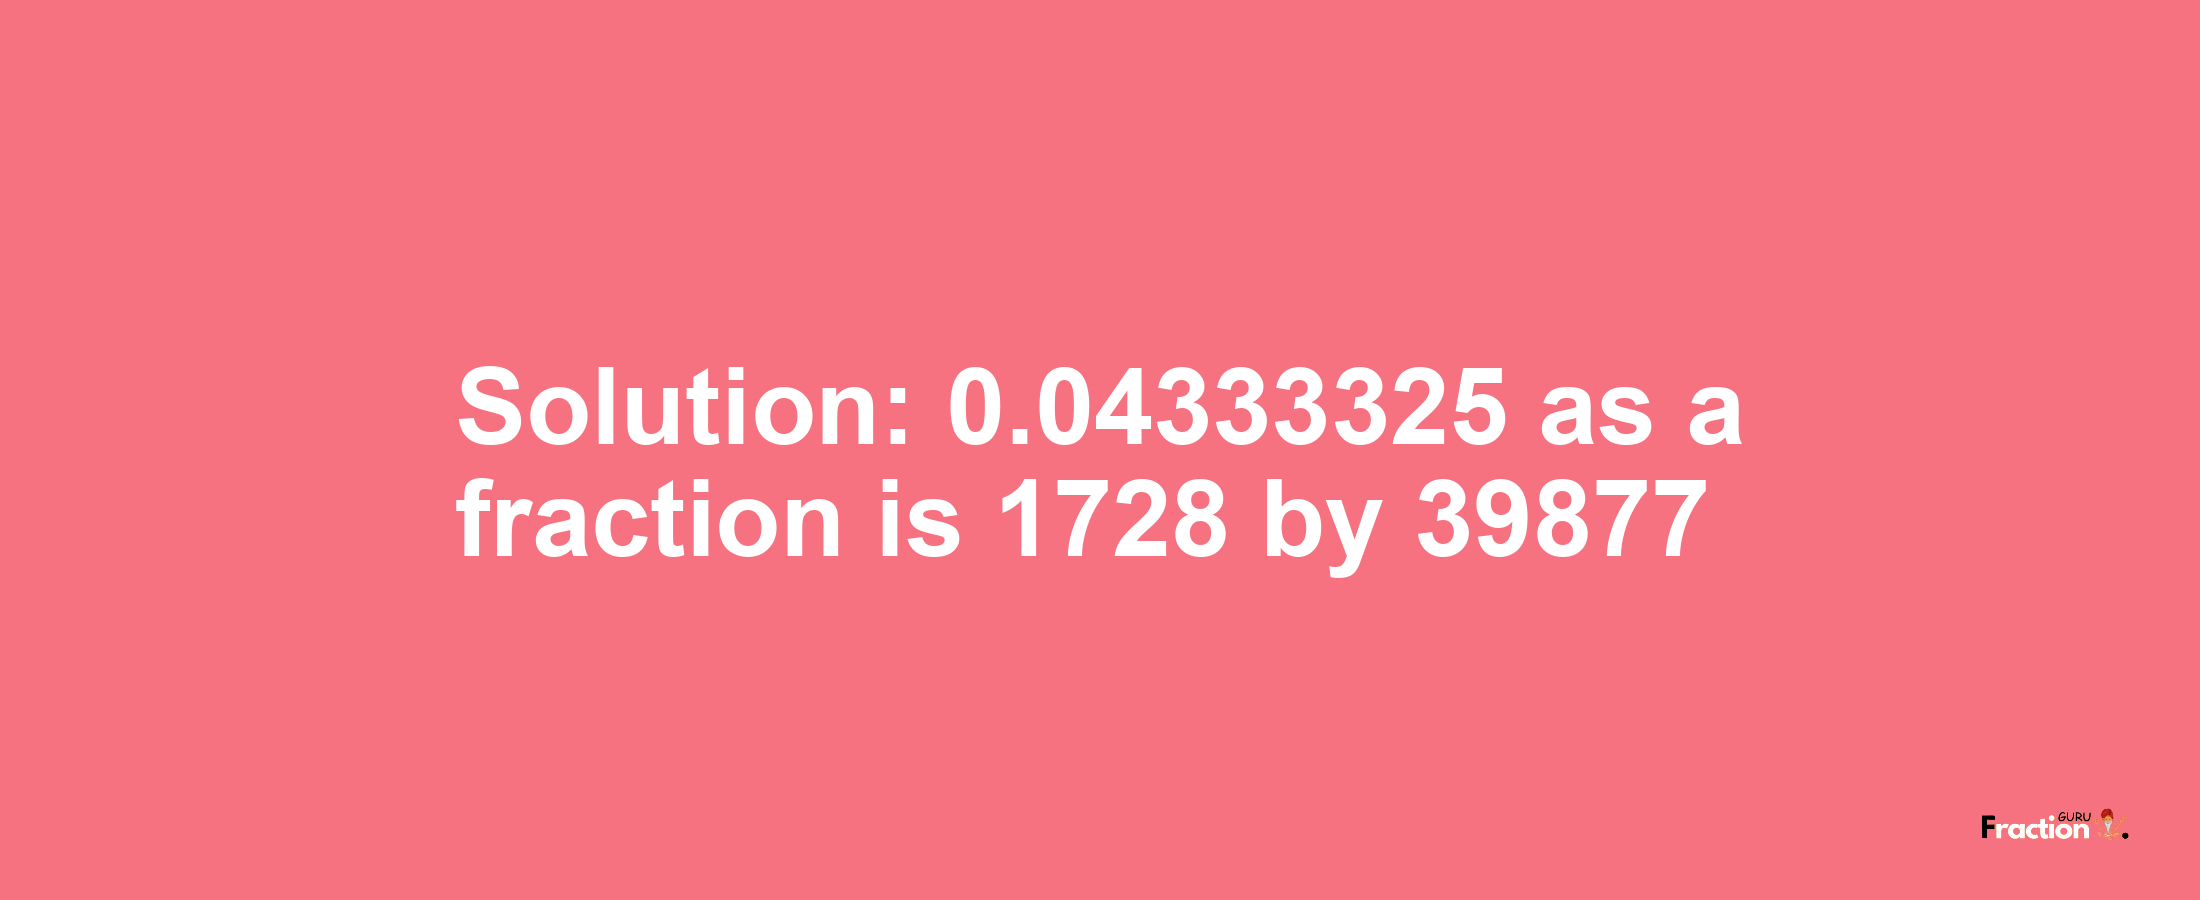 Solution:0.04333325 as a fraction is 1728/39877